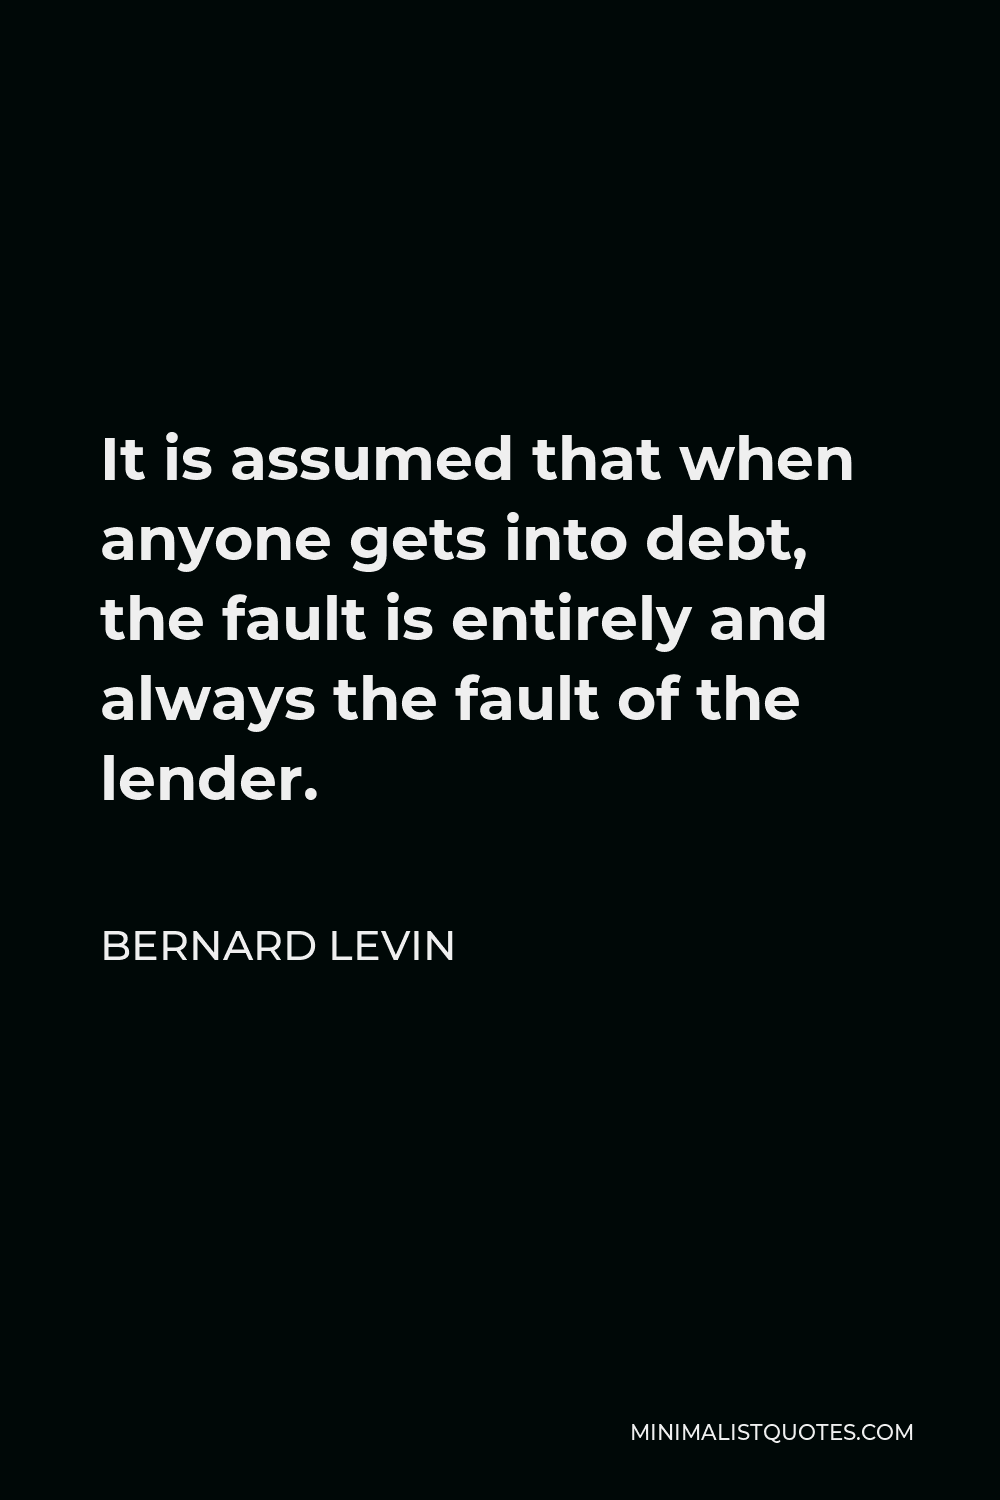 Bernard Levin Quote - It is assumed that when anyone gets into debt, the fault is entirely and always the fault of the lender.